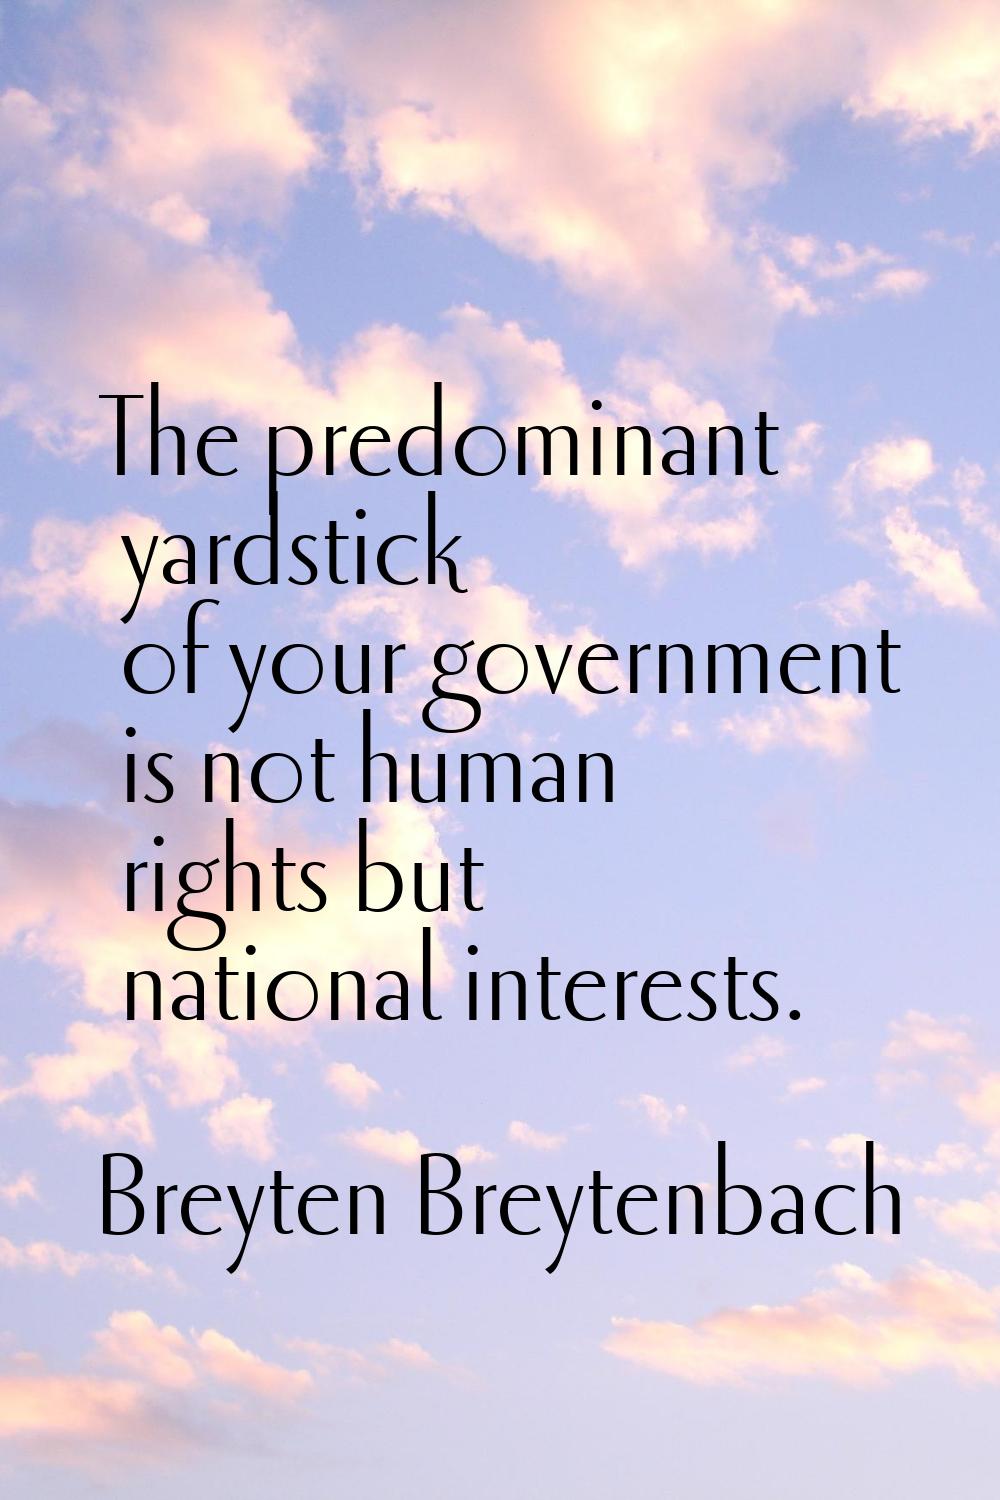 The predominant yardstick of your government is not human rights but national interests.